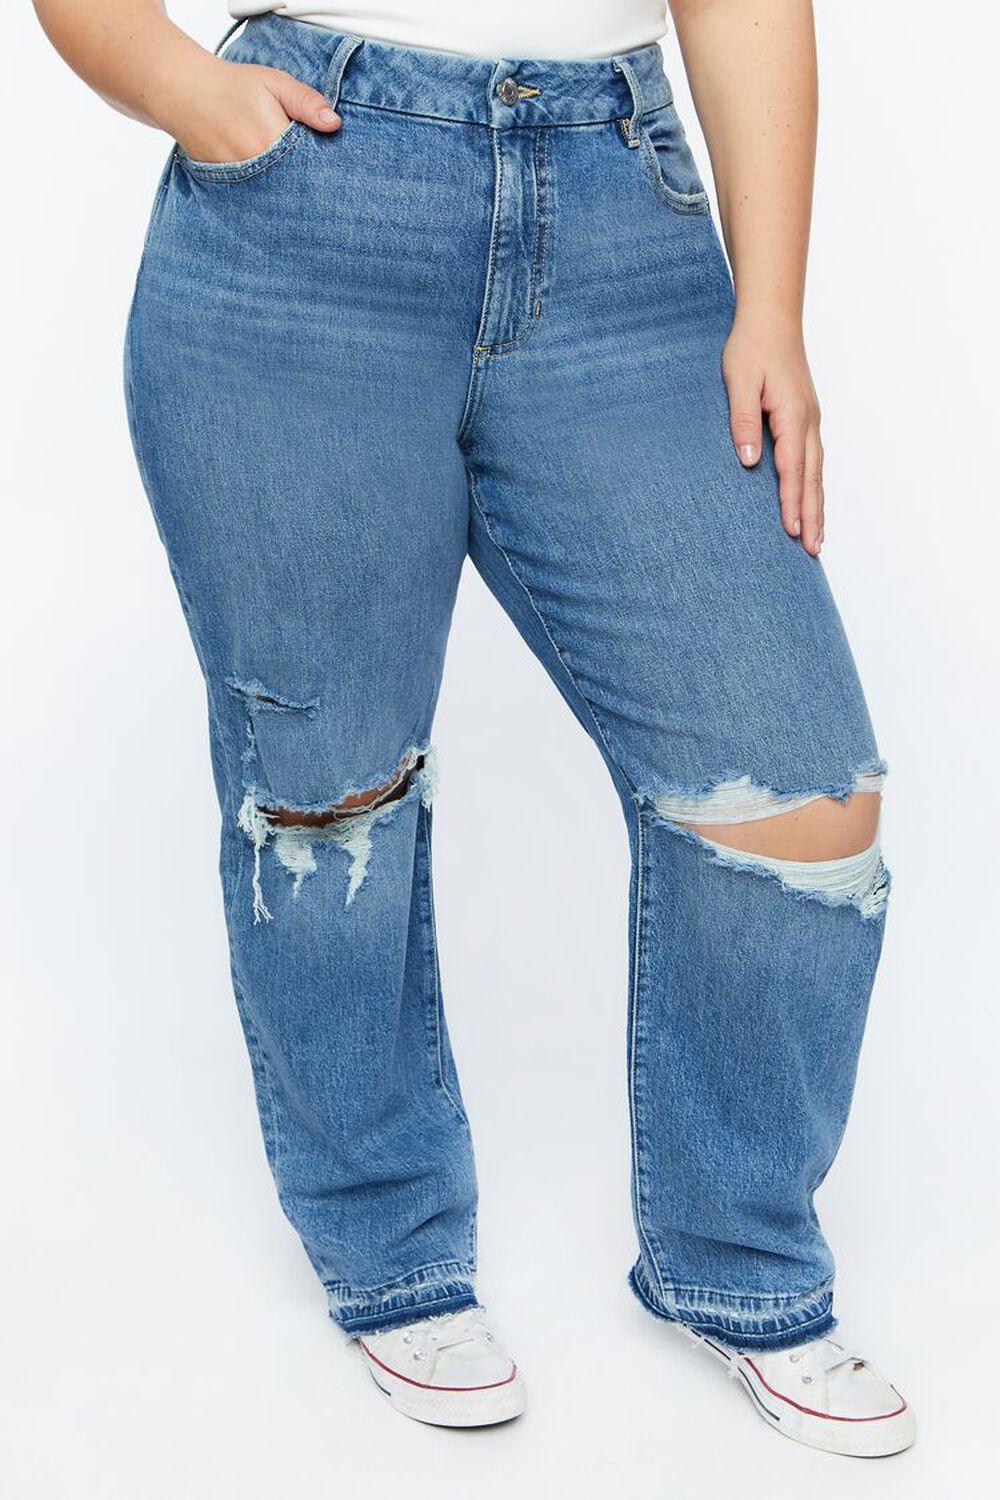 LIGHT DENIM Plus Size Recycled Cotton Distressed Mid-Rise Jeans, image 1